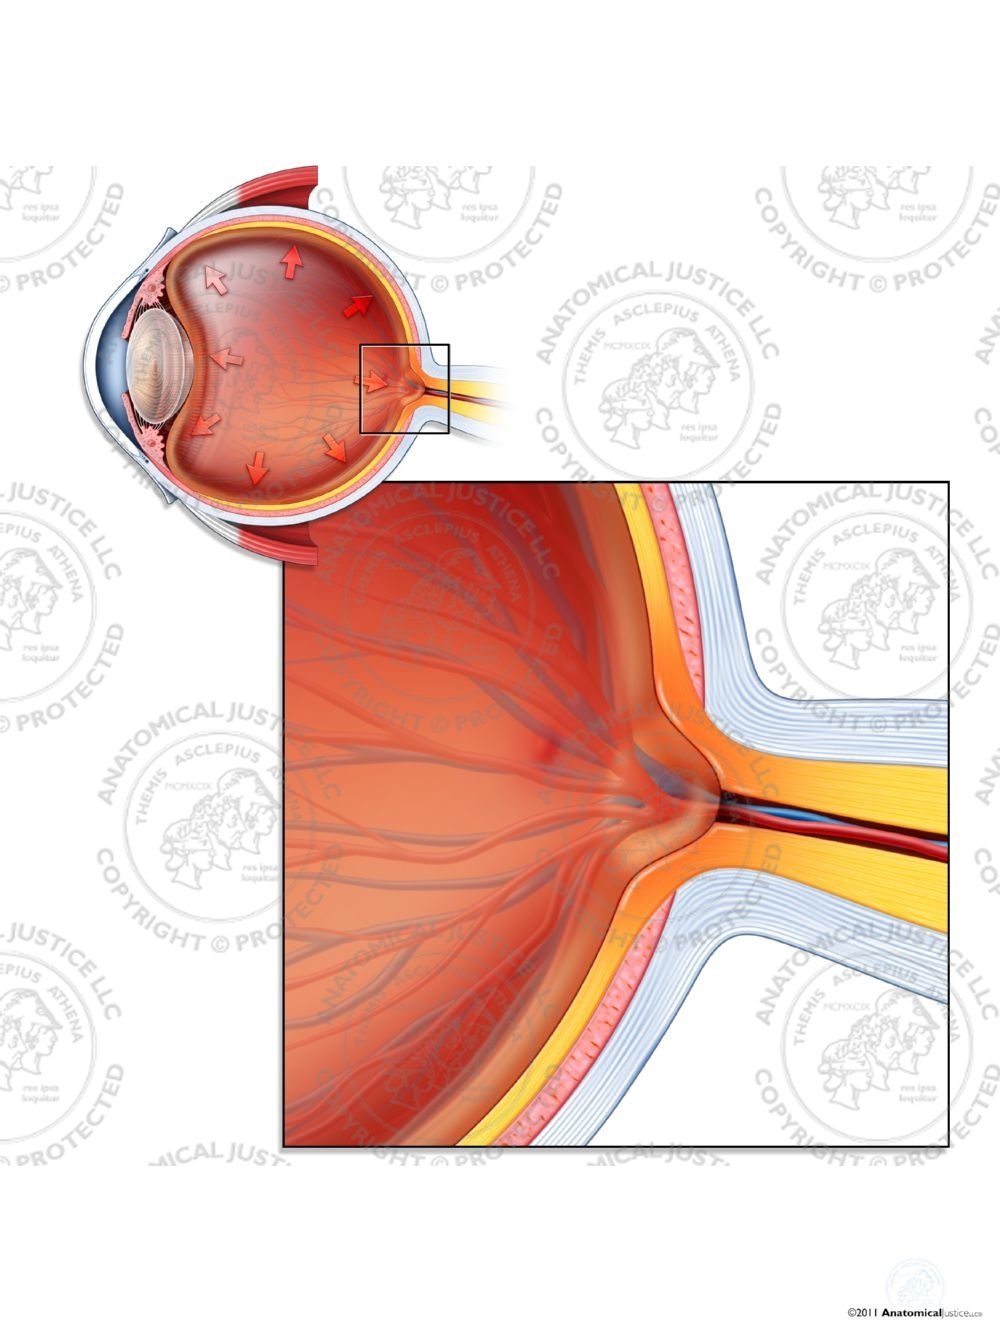 Cupped Optic Disc of the Right Eye – No Text